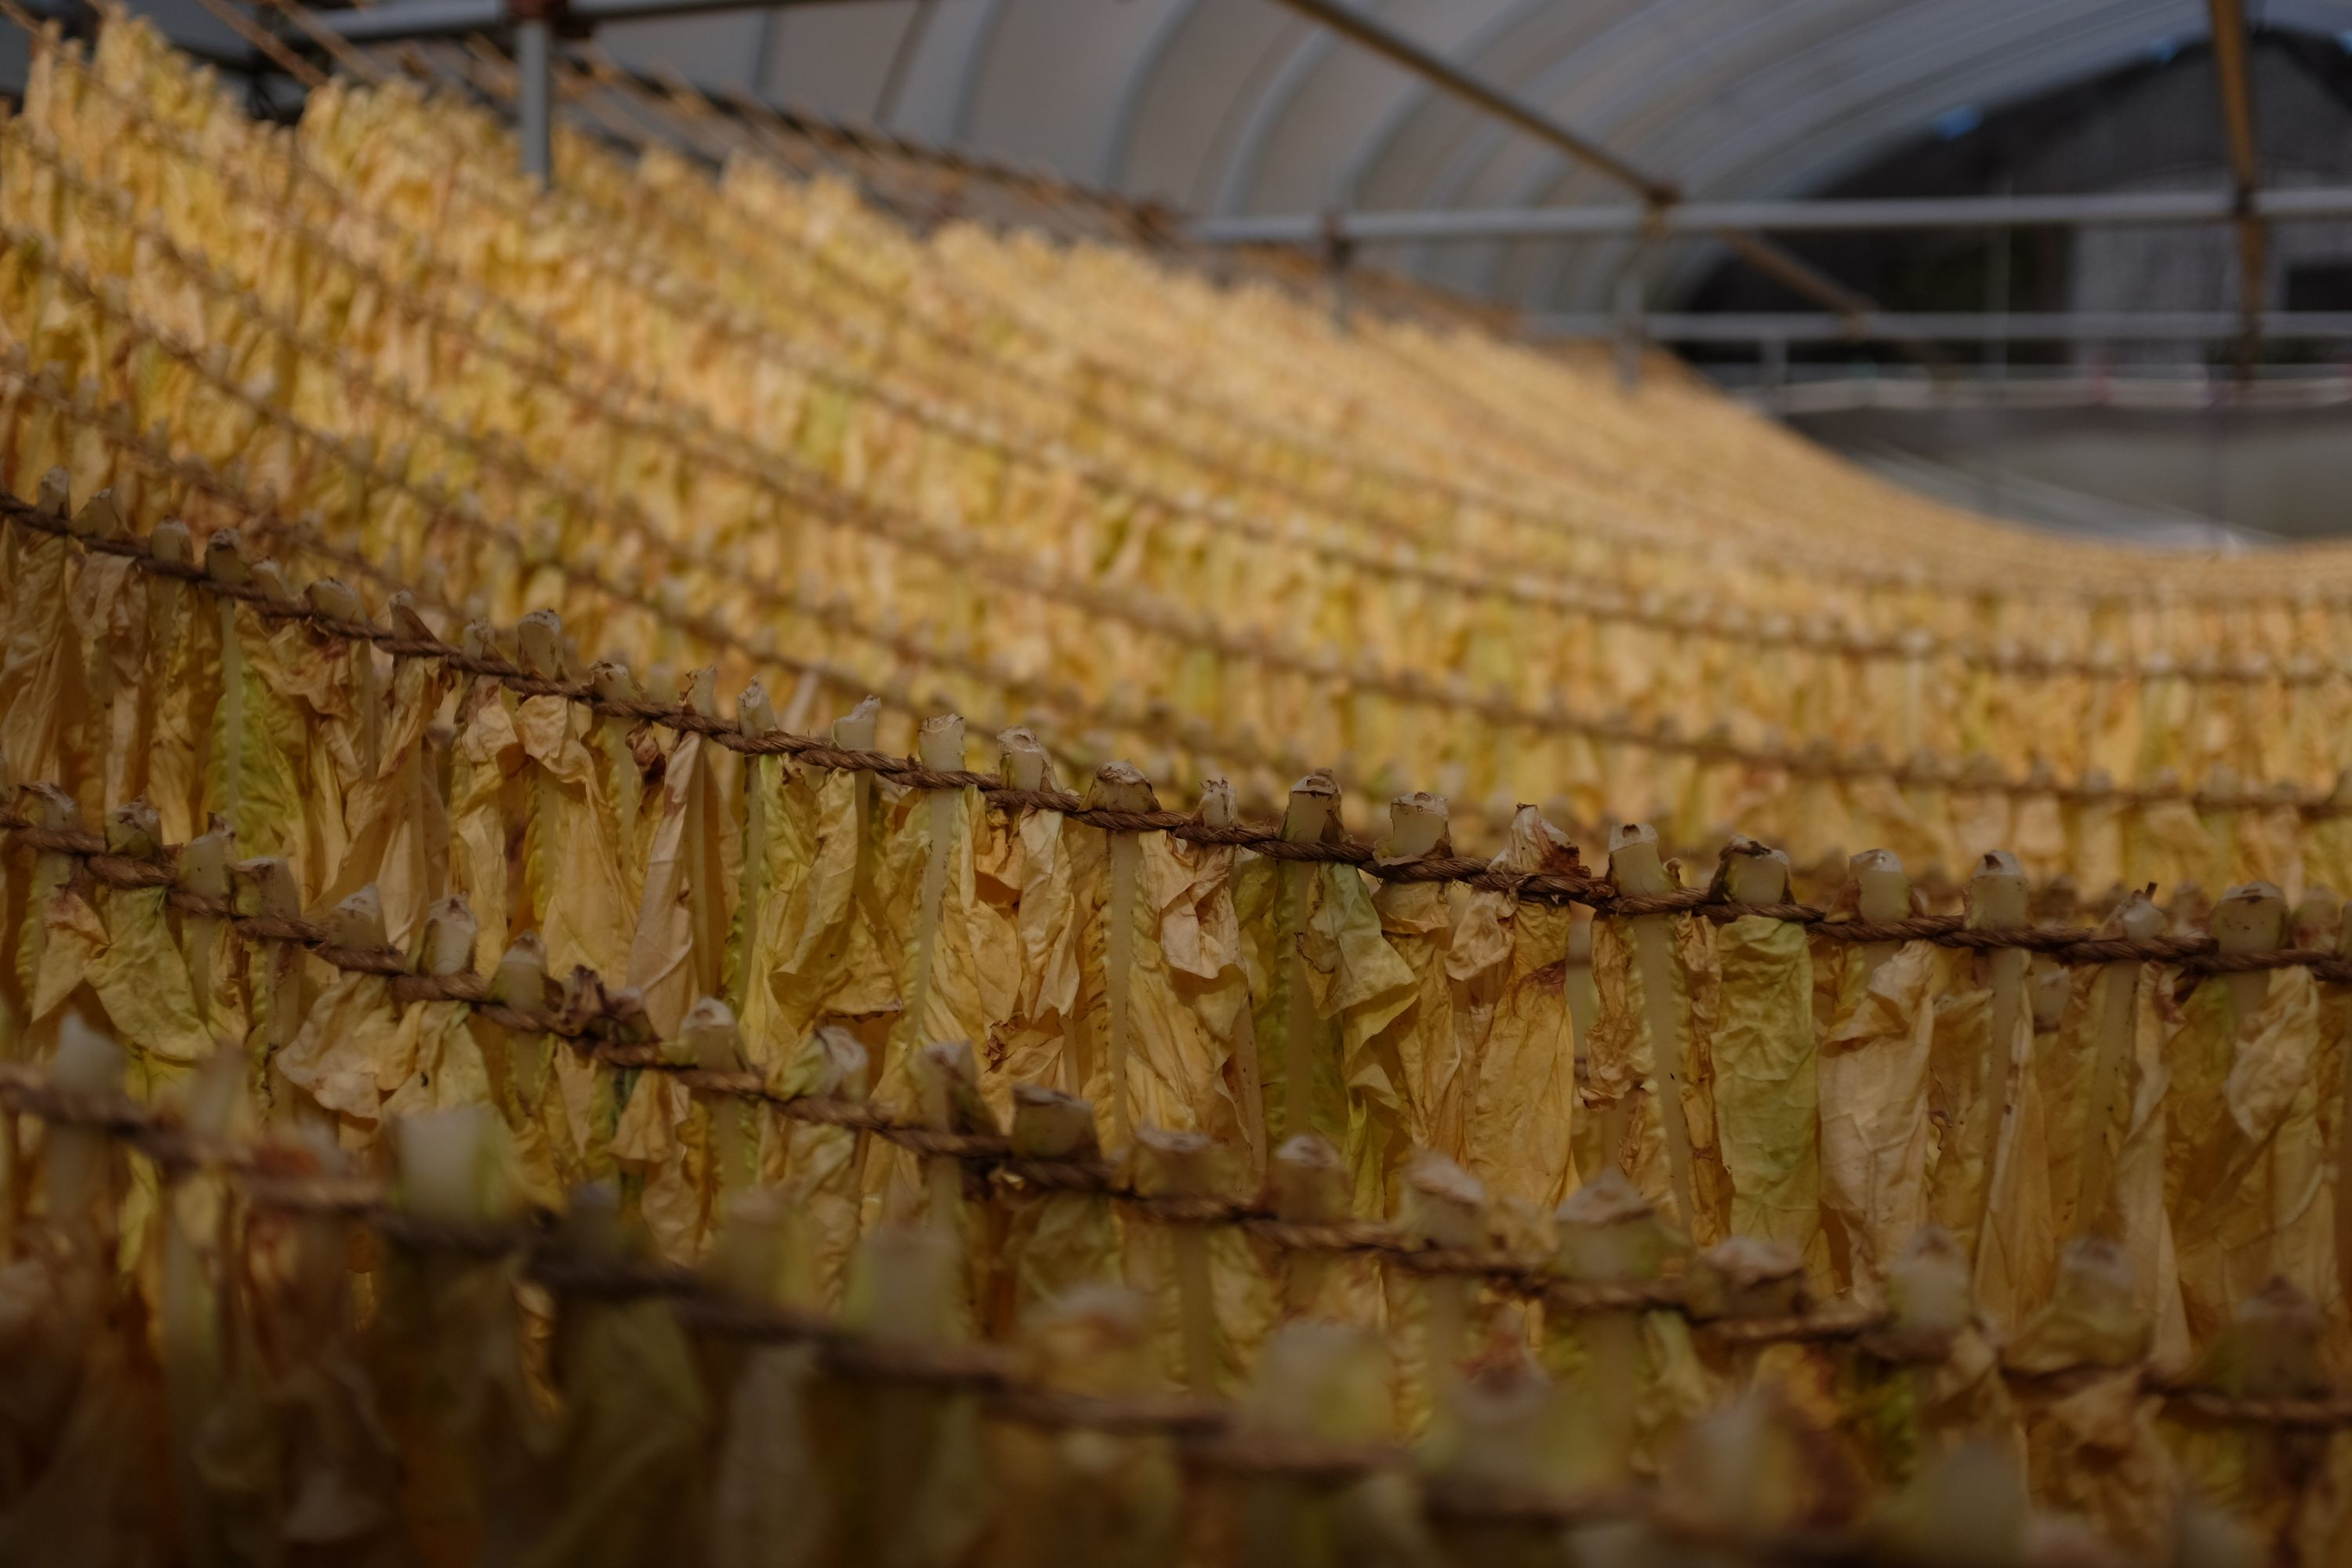 Rows of brown tobacco leaves drying in a shed.